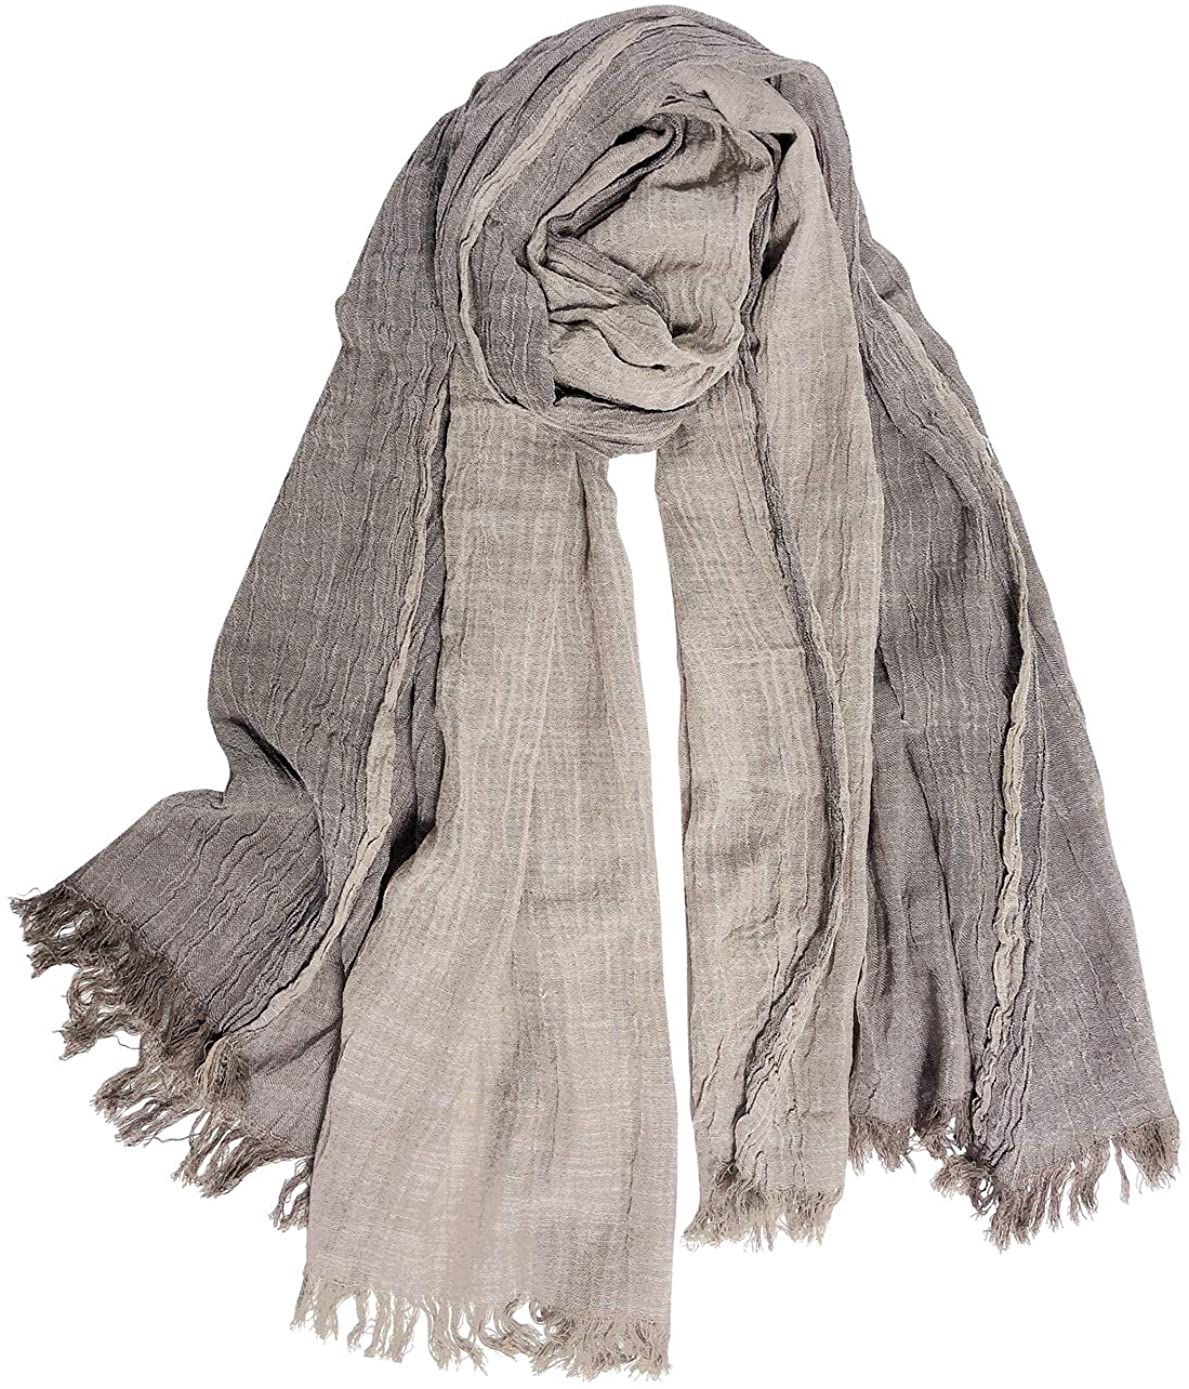 GERINLY Color Block Summer Scarf for Men Long Neck Wraps Shawl Urbanstyle  Scarf Gift for Men Lightweight Hemp Scarf Long (Black Gray Beige) at   Men's Clothing store